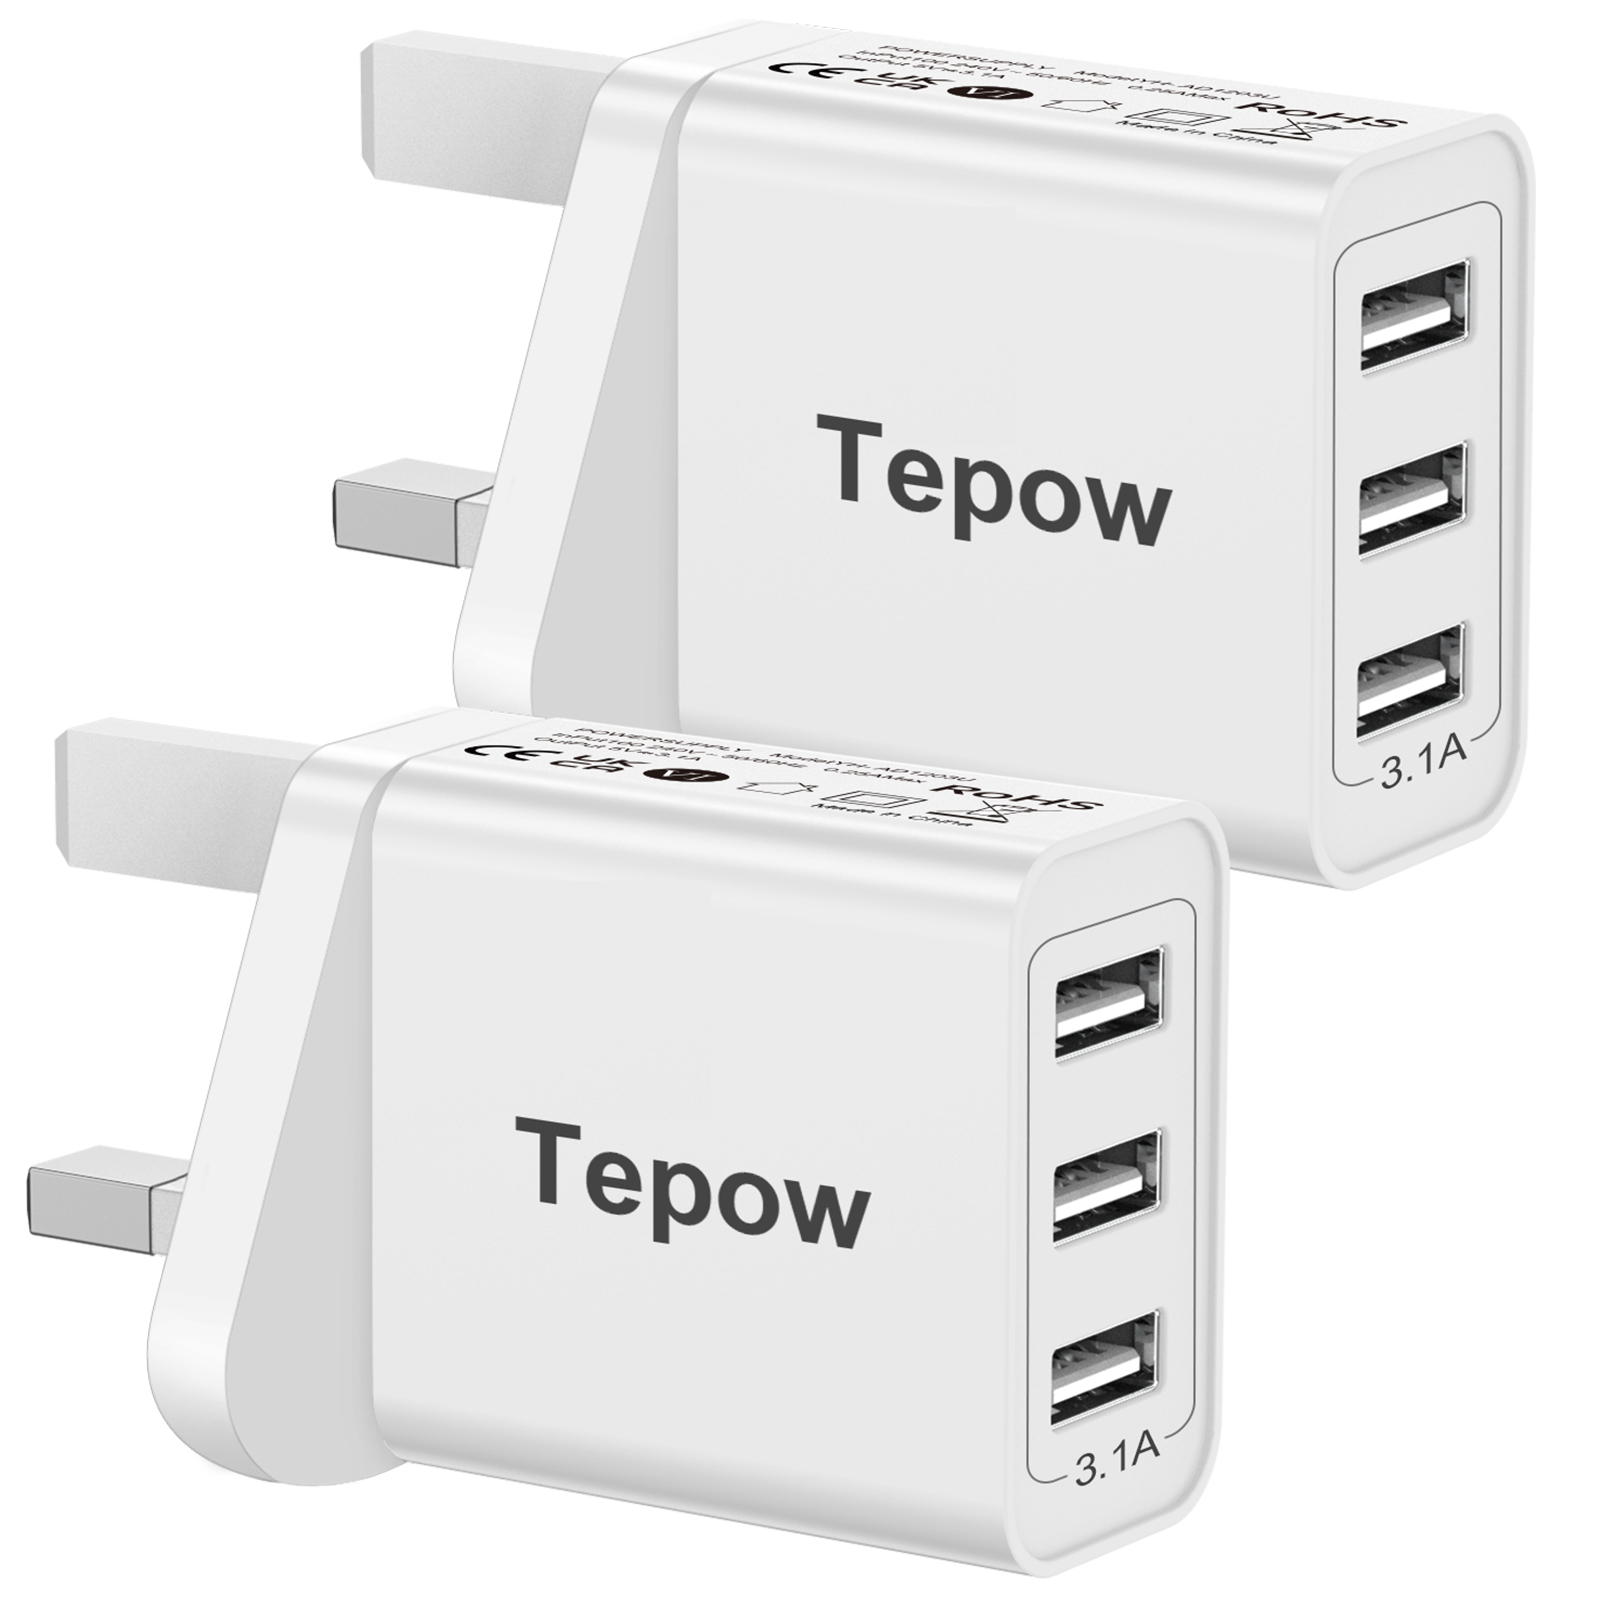 Multi USB Plug Adaptor UK, Multi USB Charger Plug UK 15W/3A 2Pack, Tepow 3 Port USB Wall Charger Adapter with Smart IC Fast Charging for iPhone 14/13/12/11/XS/XR/X/8/7/6 Plus,iPad,Samsung Galaxy,Huawei